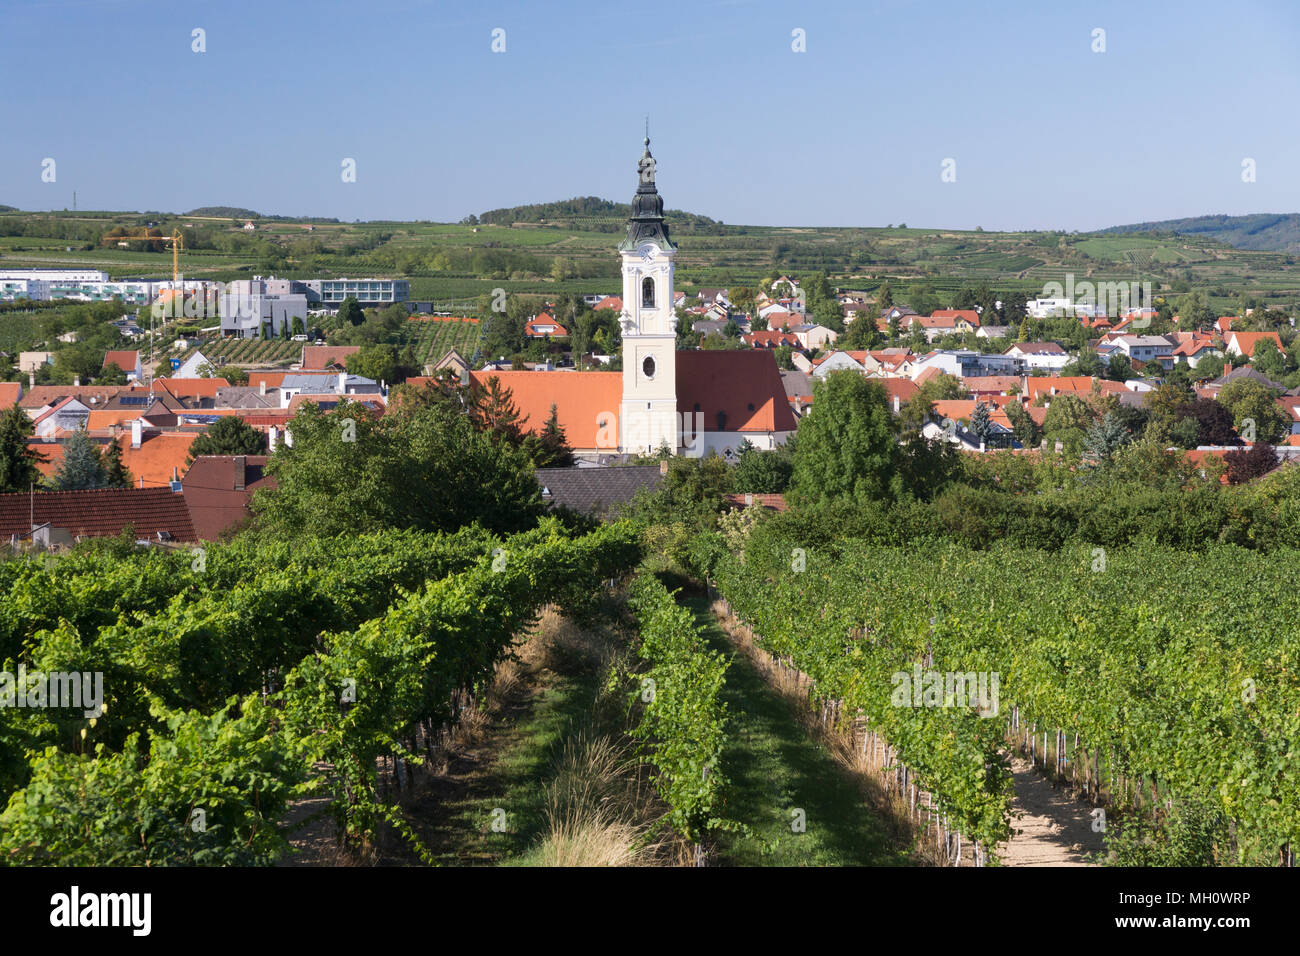 The St. Laurentius Church and the Loisium Wine and Spa Resort in Langenlois, the 'wine capital' and popular tourist destination of Lower Austria Stock Photo